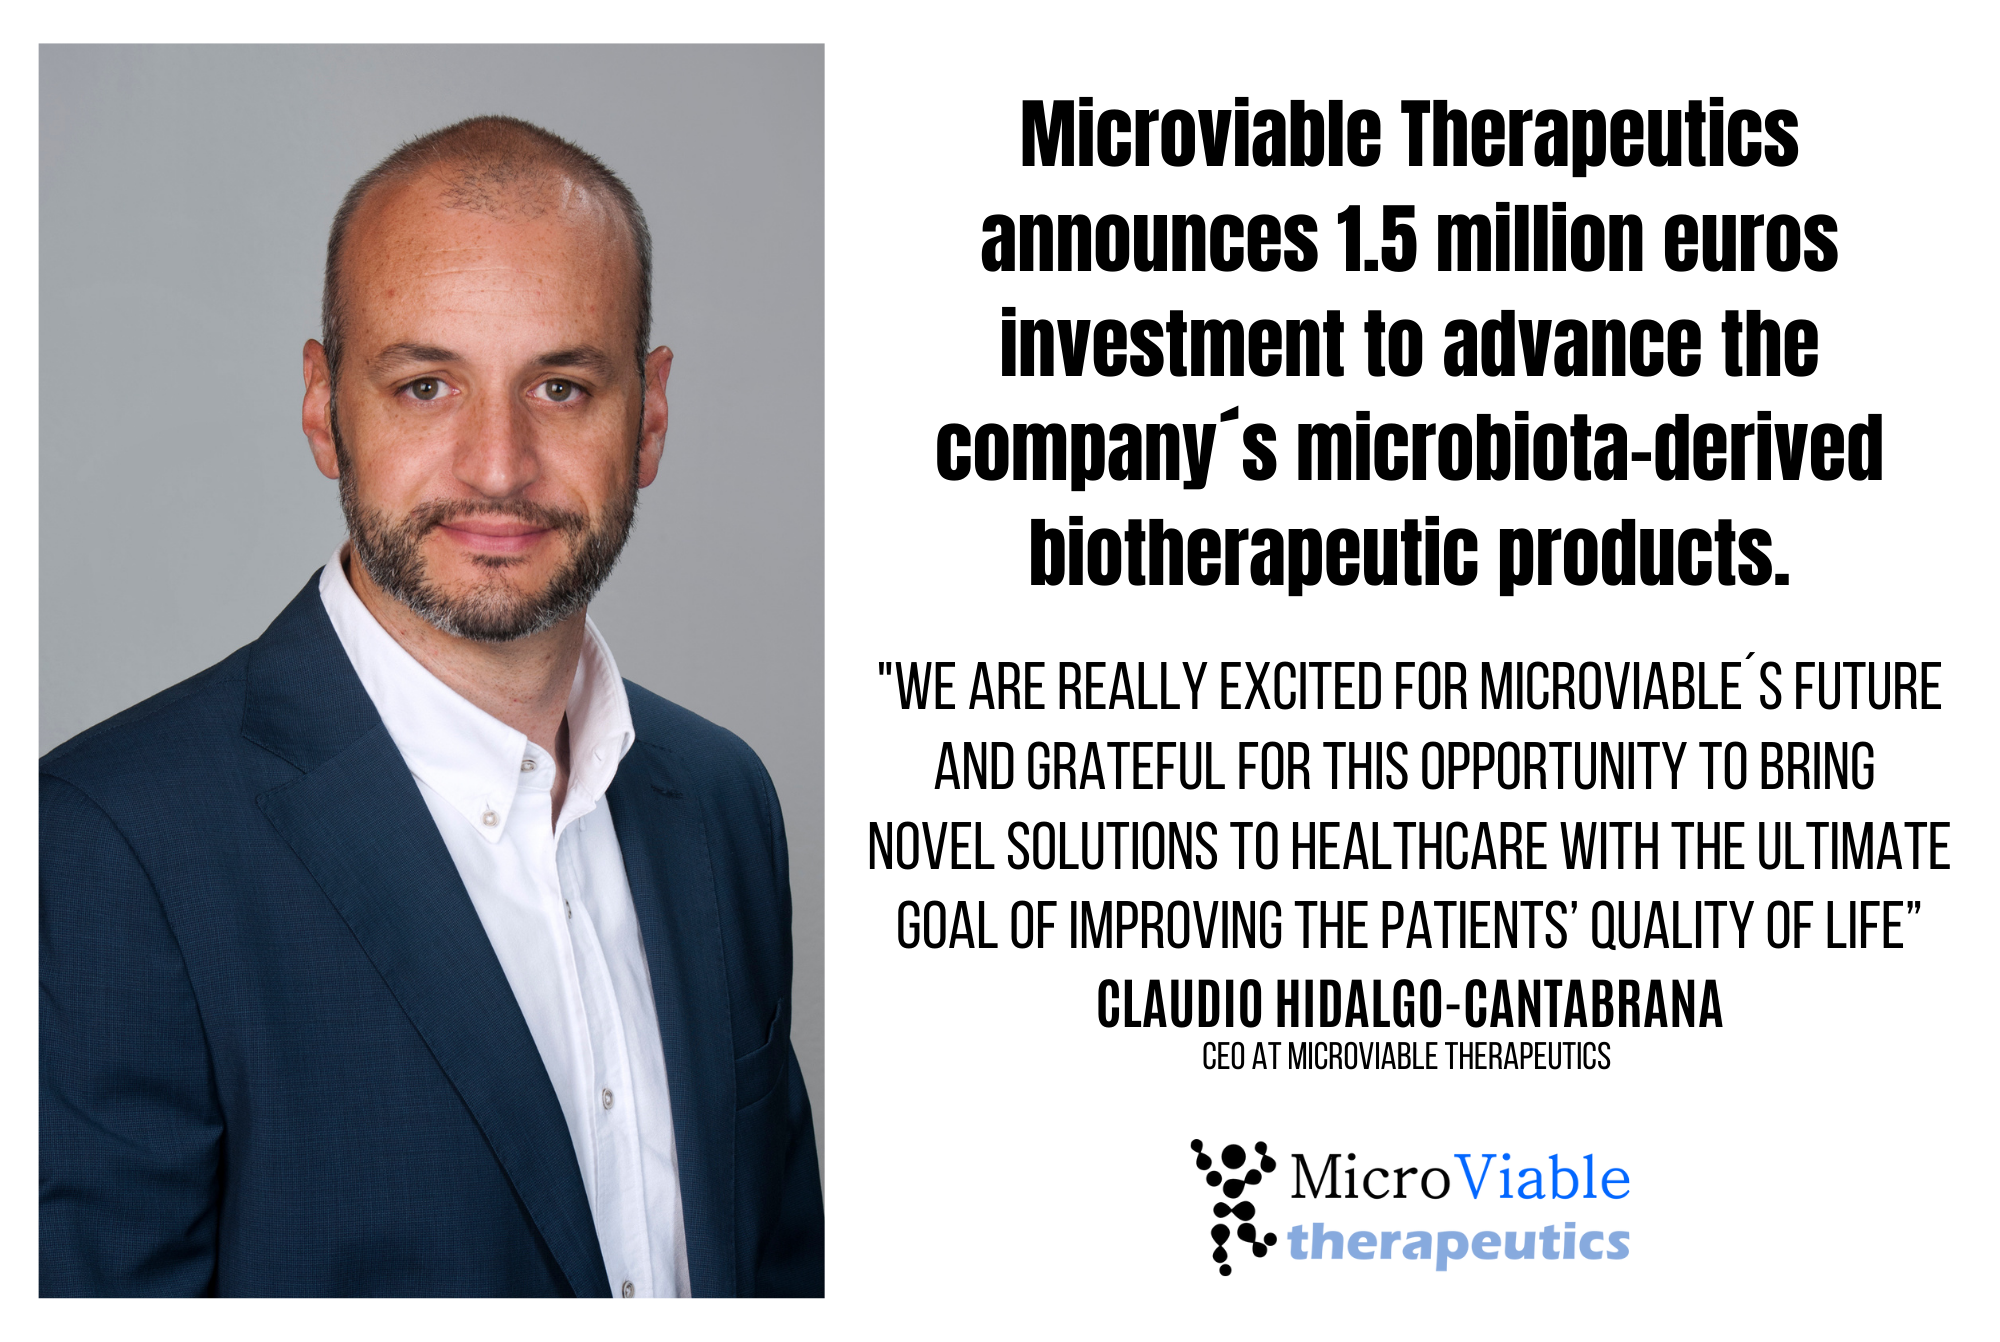 Microviable Therapeutics announces 1.5 million euros investment to advance the company´s microbiota-derived biotherapeutic products.